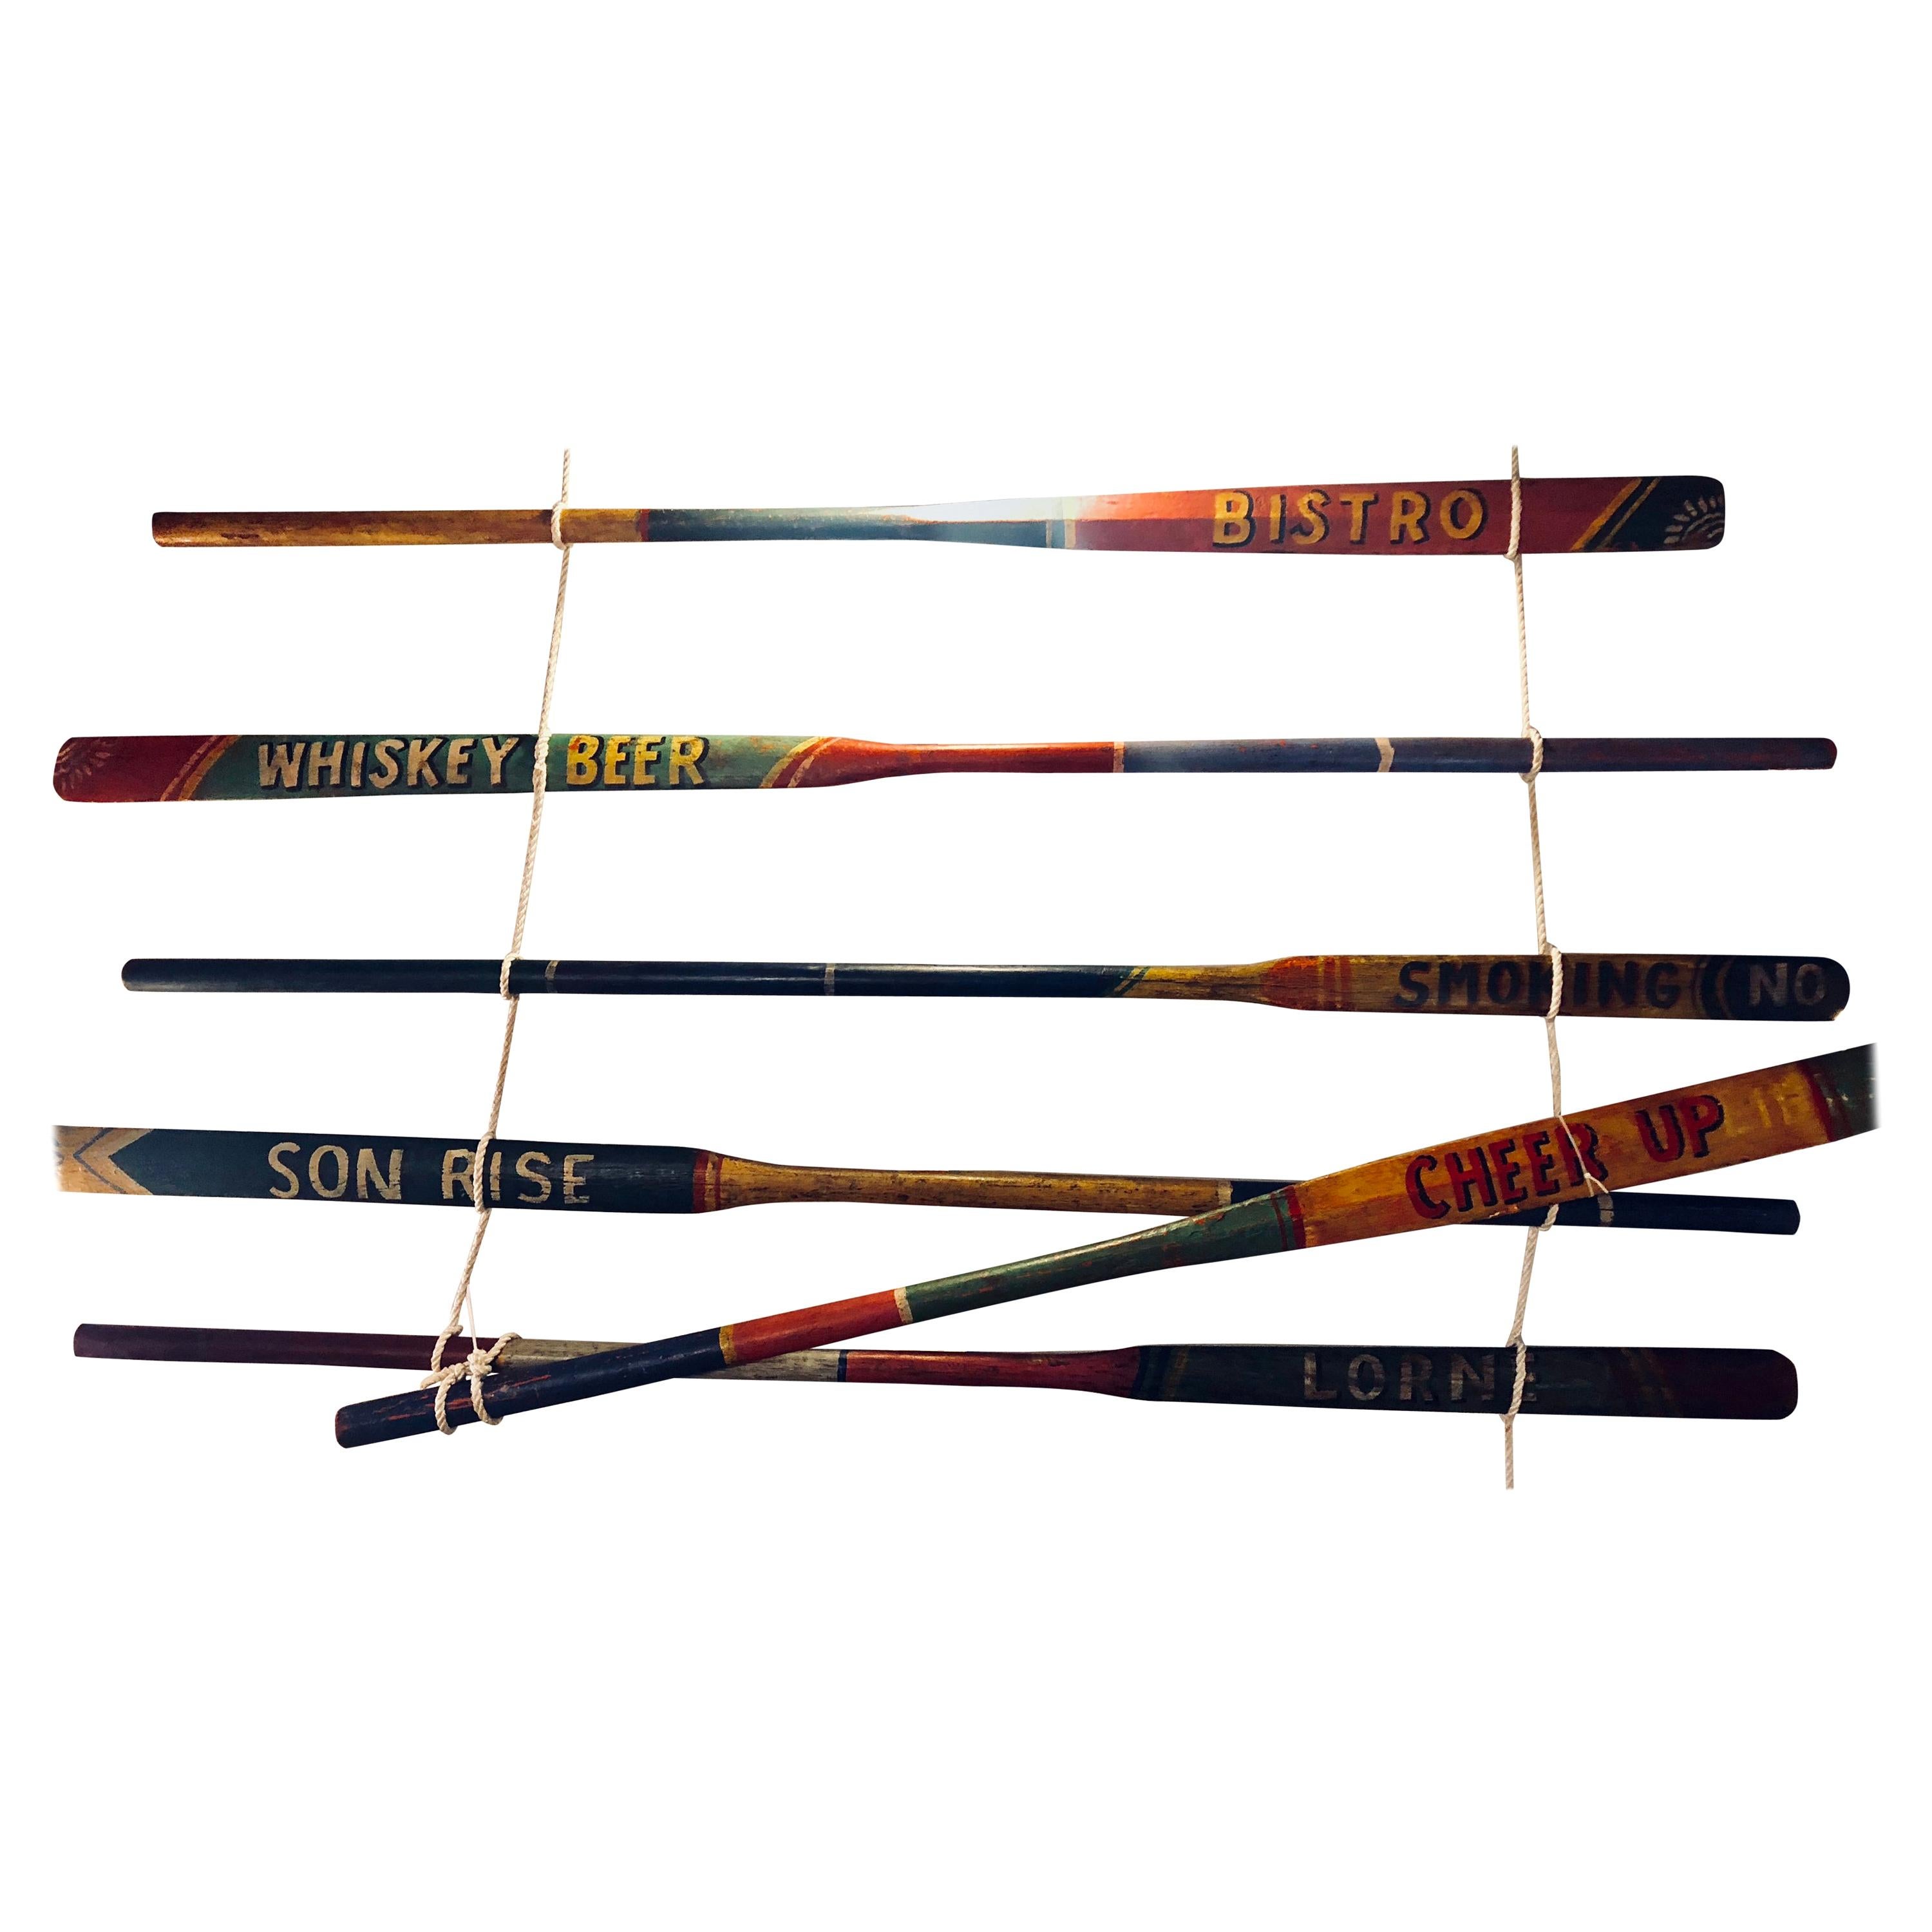 Set of 2 Hand Painted Inspirational Rowing Oars or Paddles Priced Individually